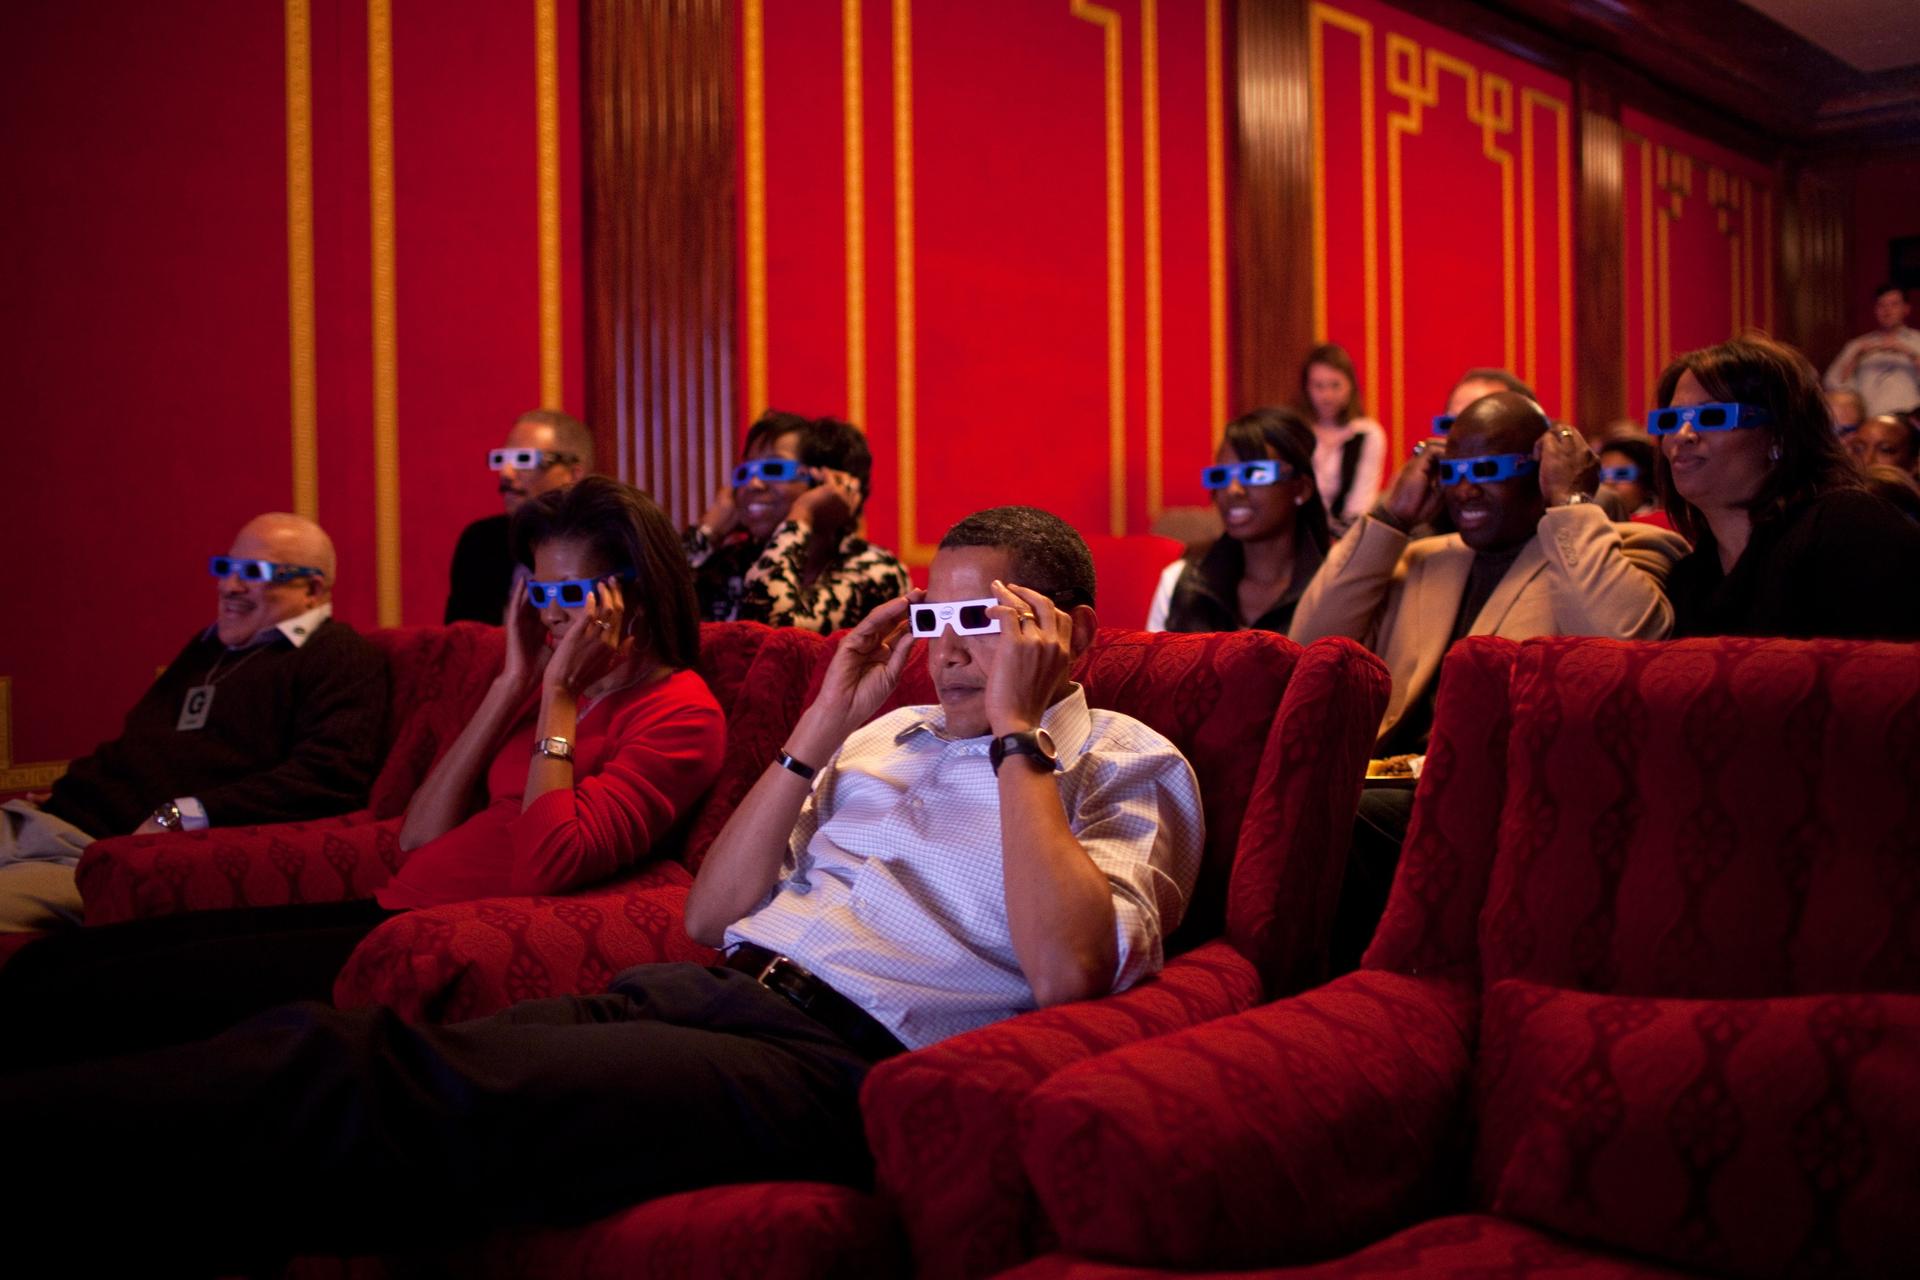 President Barack Obama and First Lady Michelle Obama in the family theater of the White House on February 1, 2009.